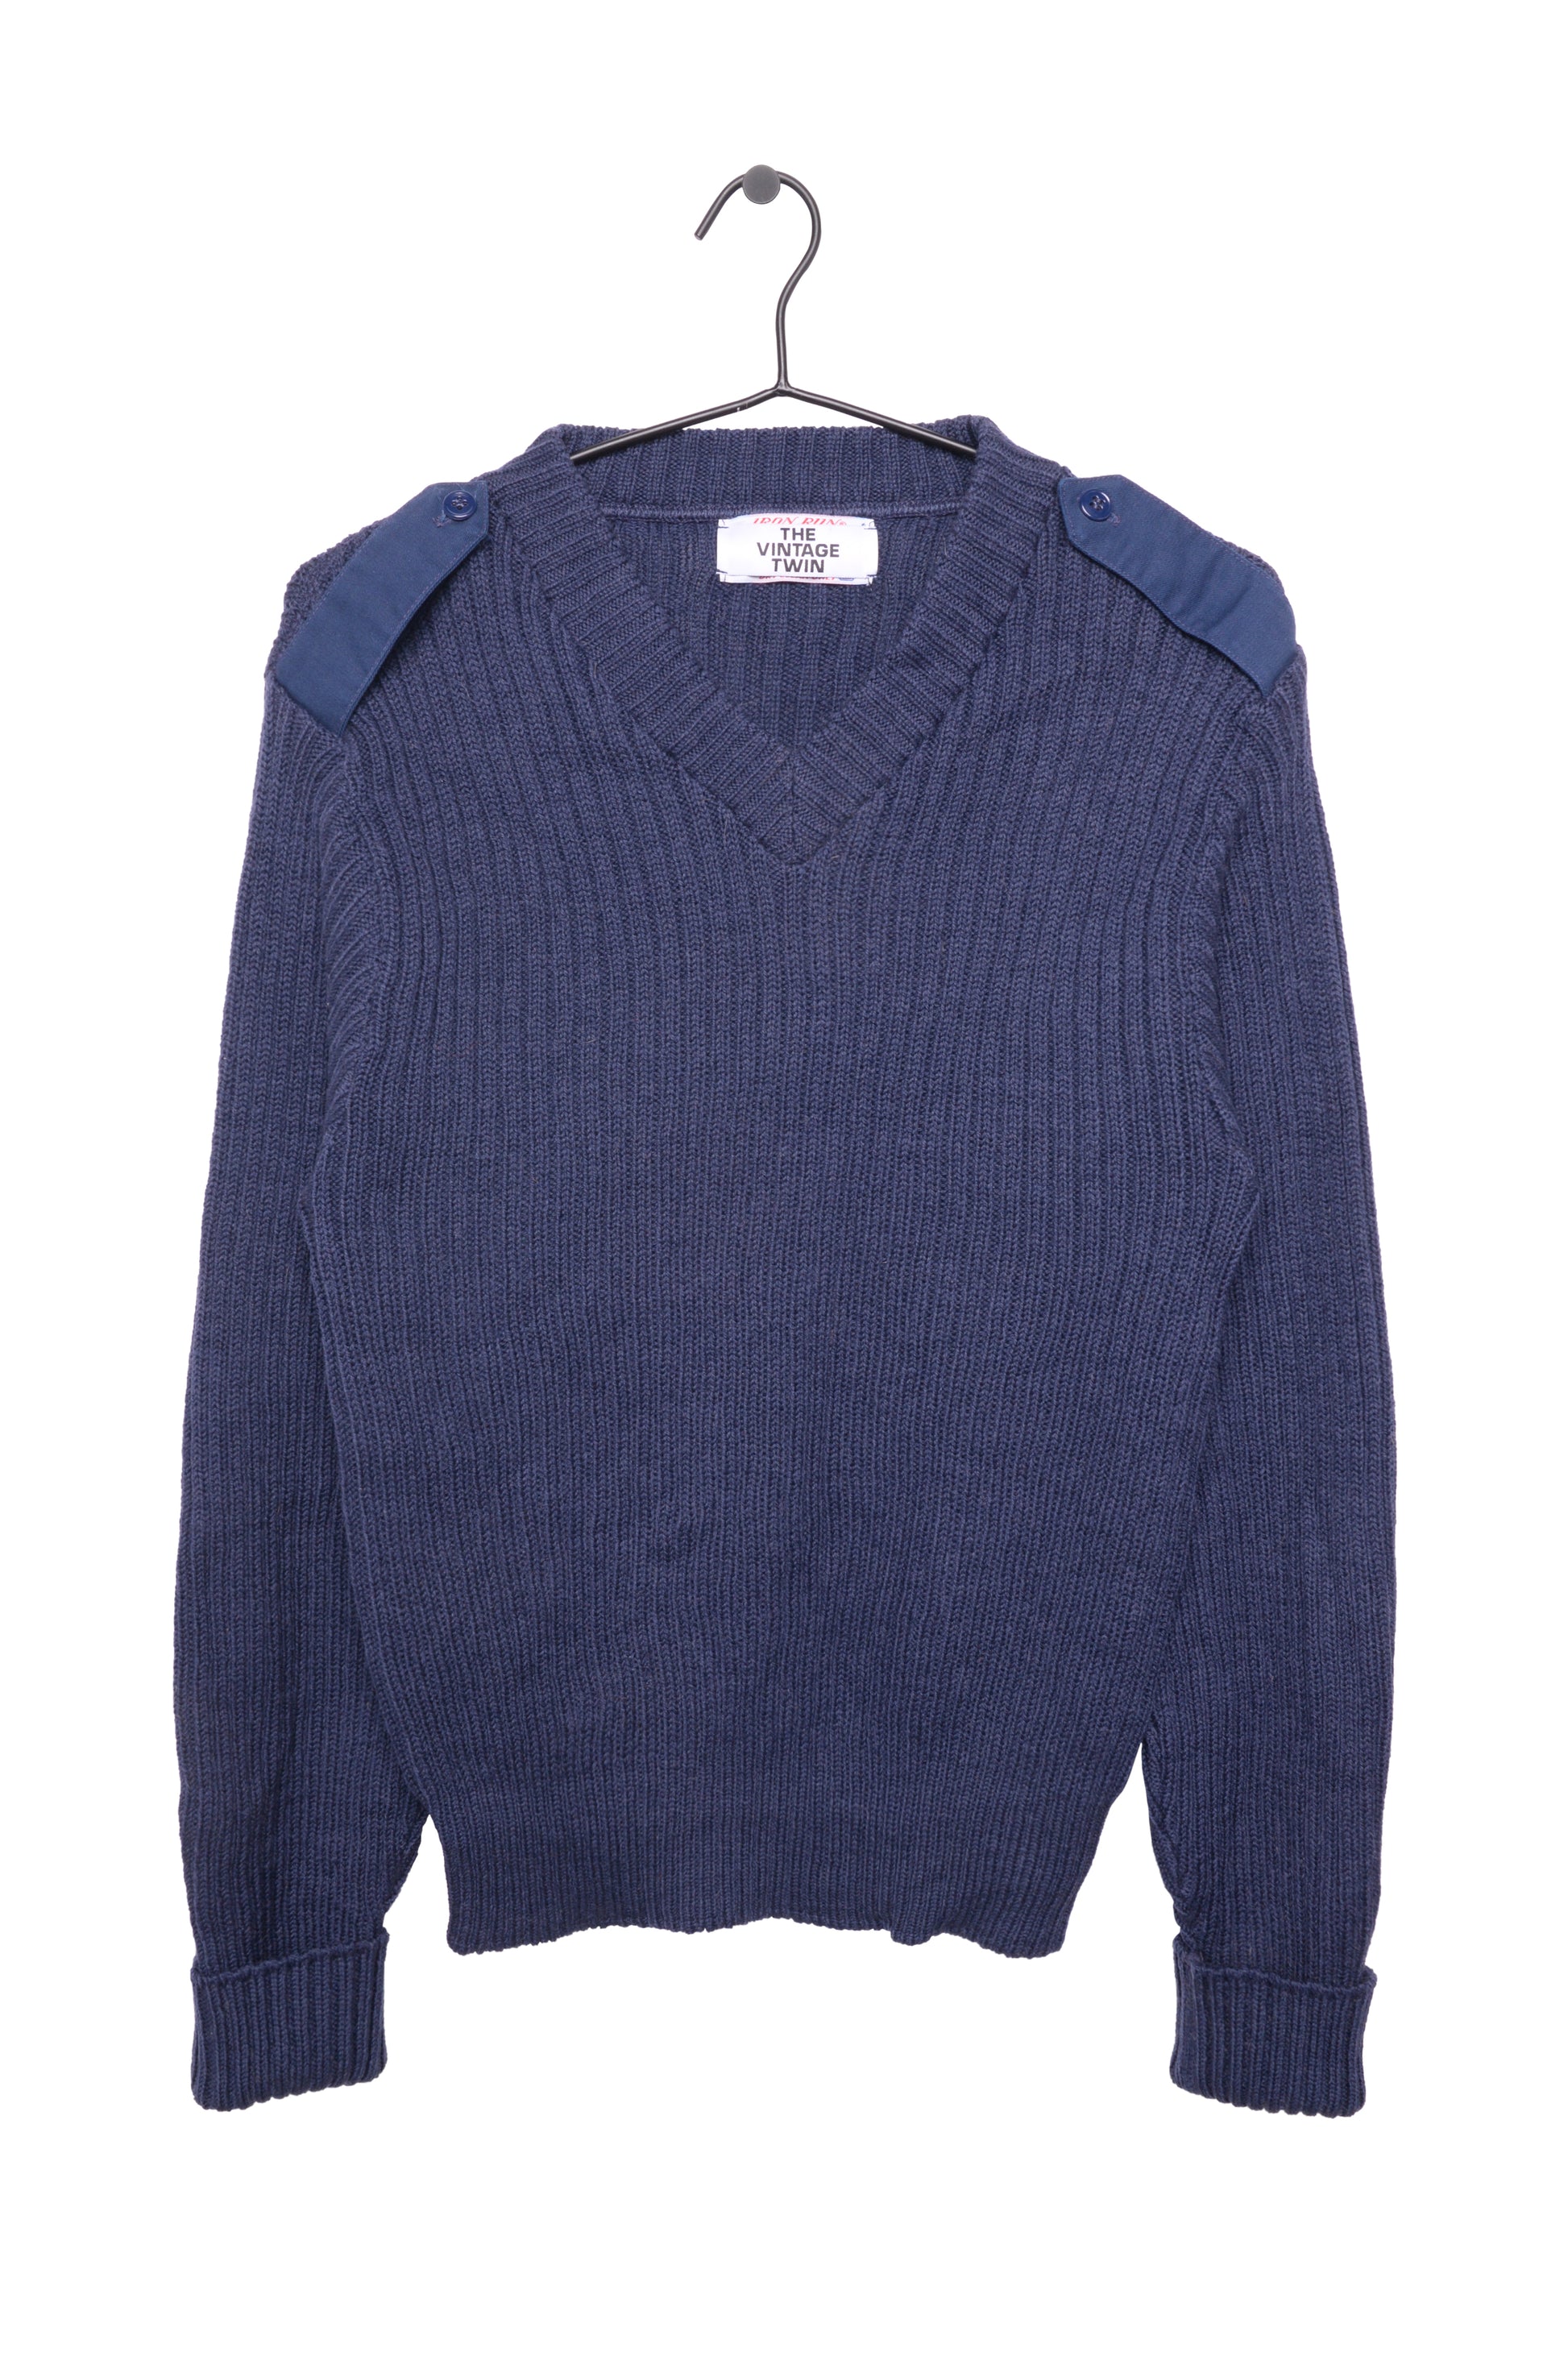 Vintage Elbow Patch Wool Sweater - The Vintage Twin